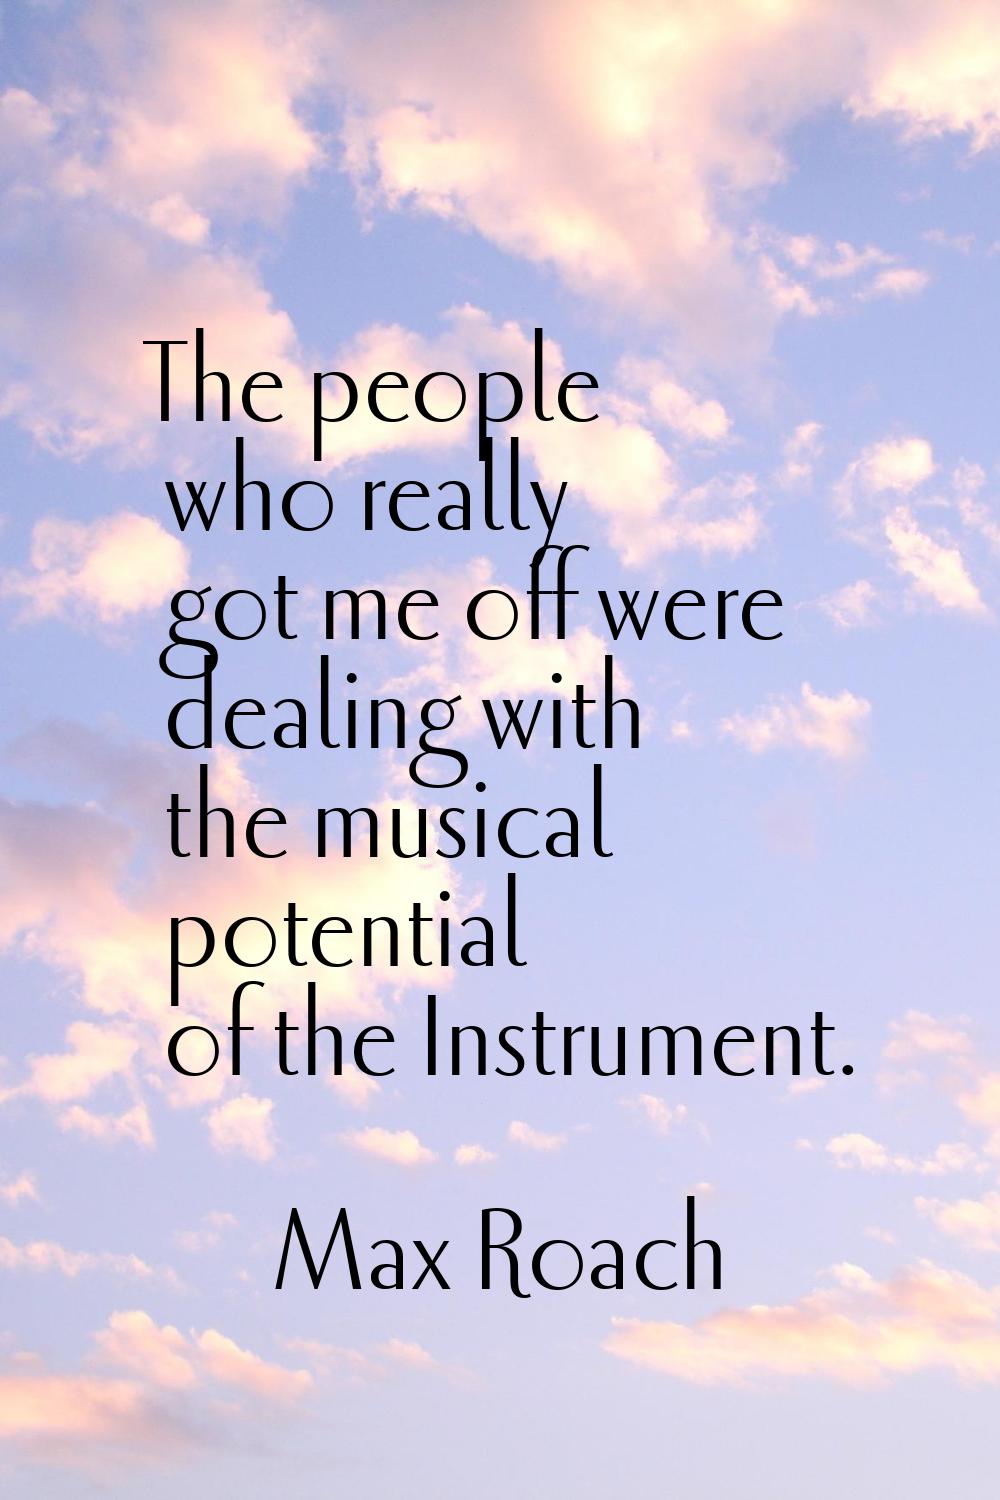 The people who really got me off were dealing with the musical potential of the Instrument.